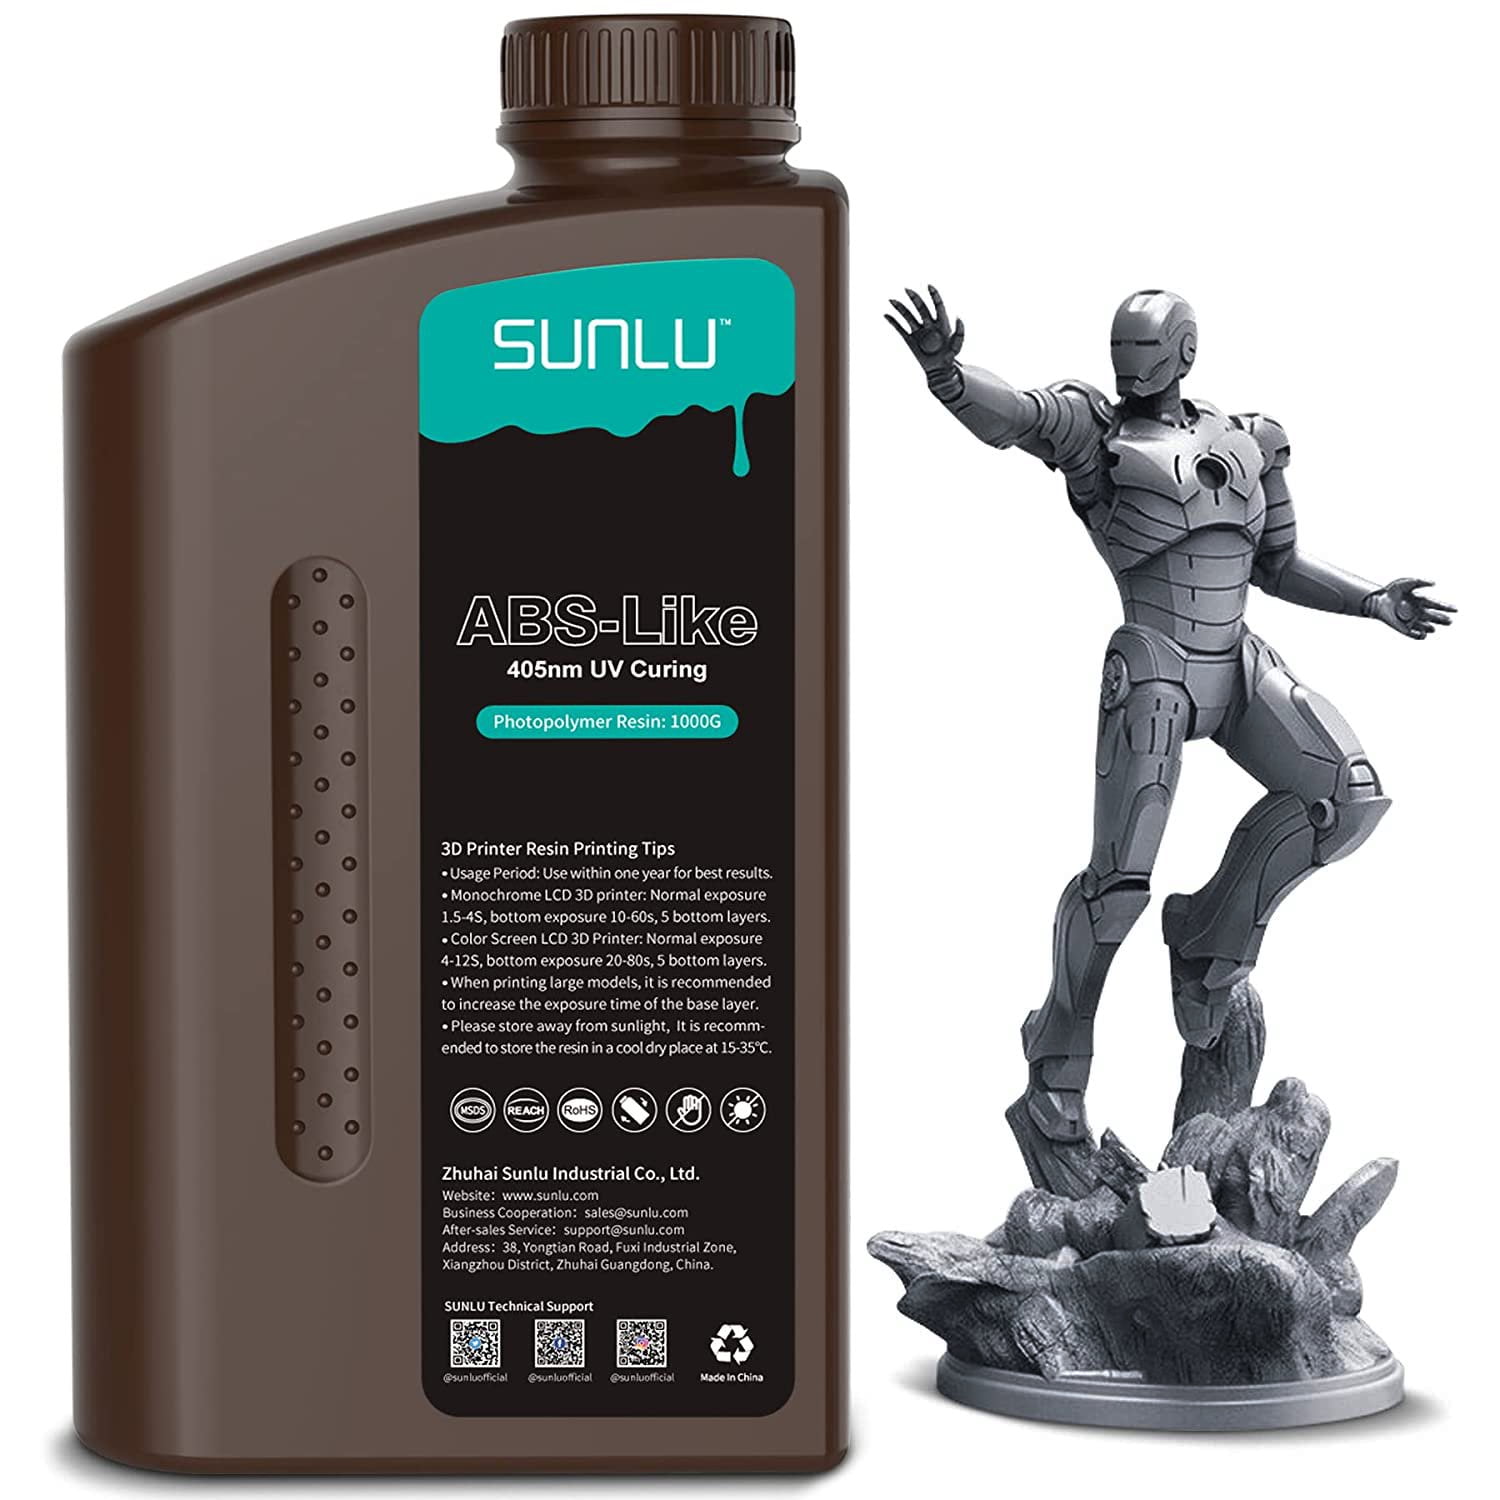 SUNLU 1KG ABS-Like 3D Printer Resin, Fast Curing Strong 405nm